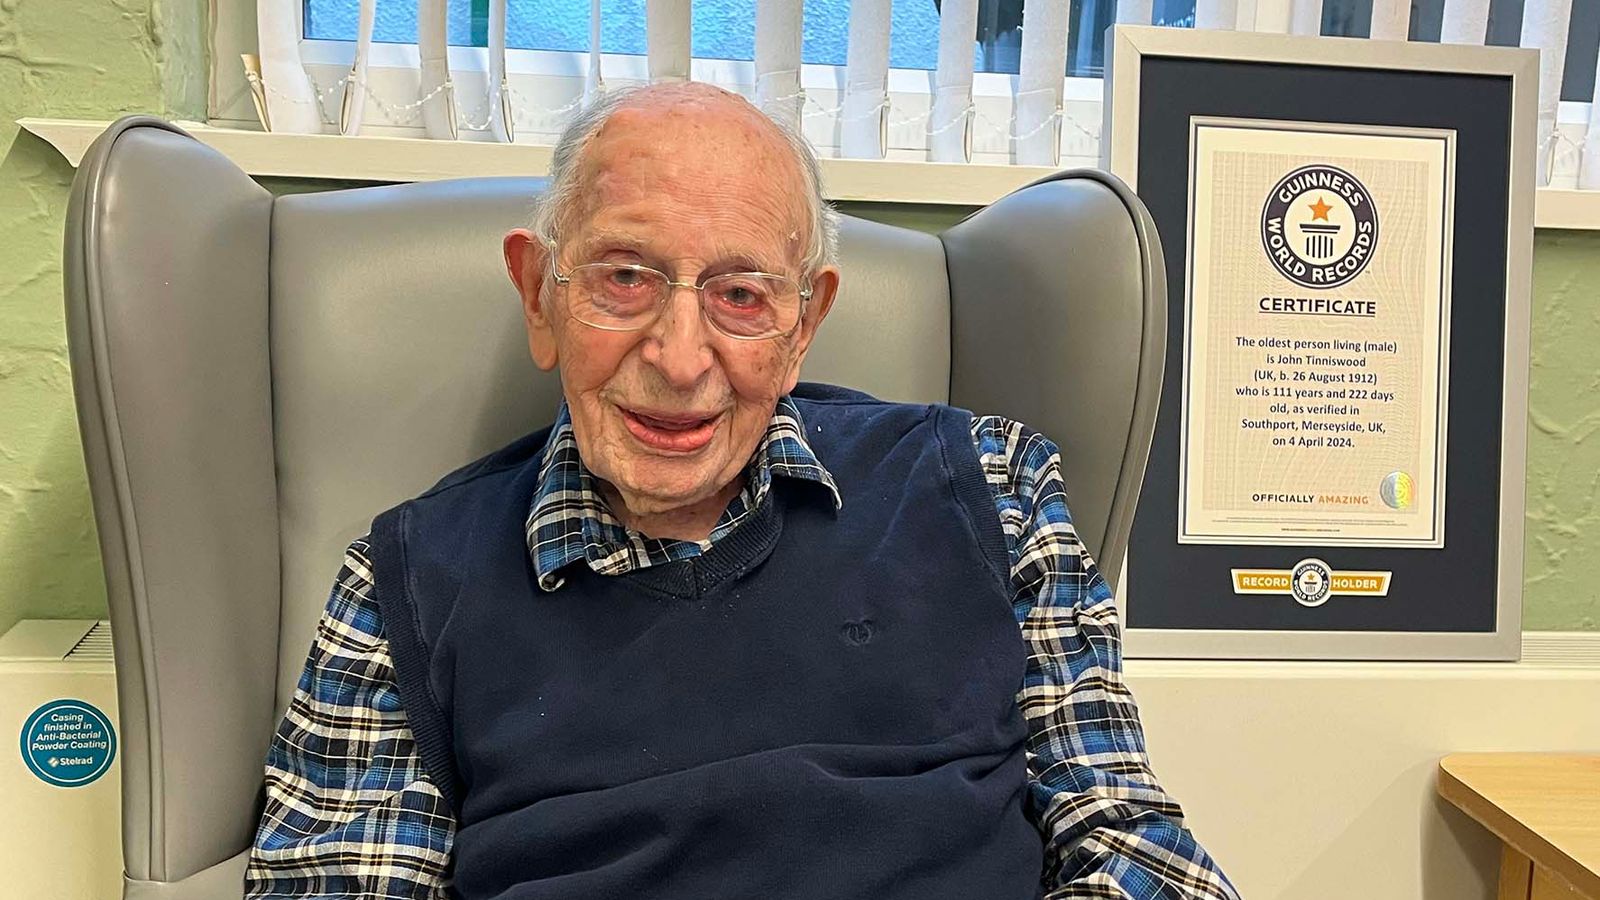 British man named John Tinniswood earns title of world’s oldest living man at 111 years old